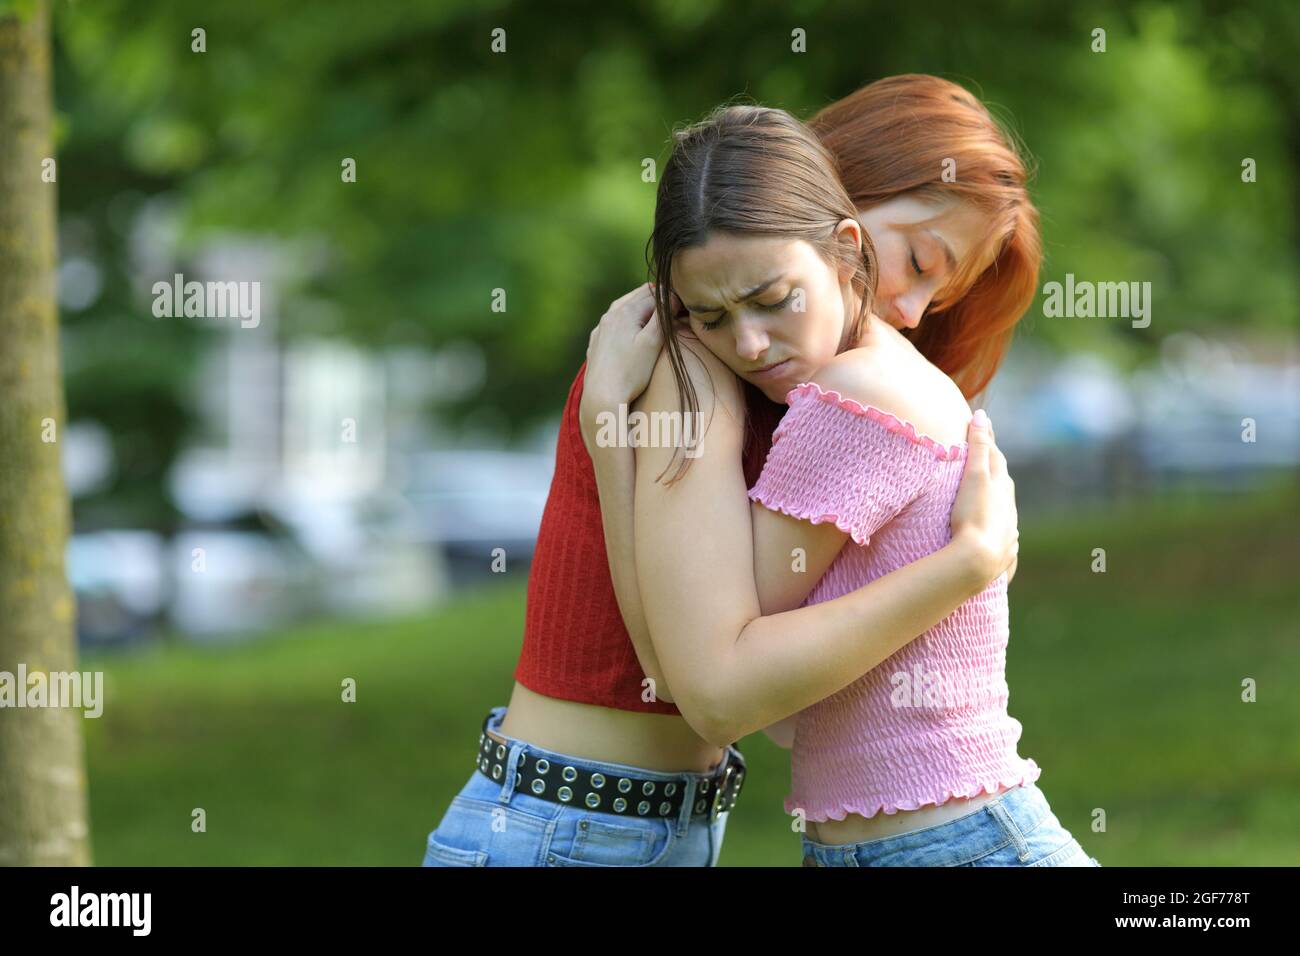 Sad women reconciling hugging in a green park Stock Photo